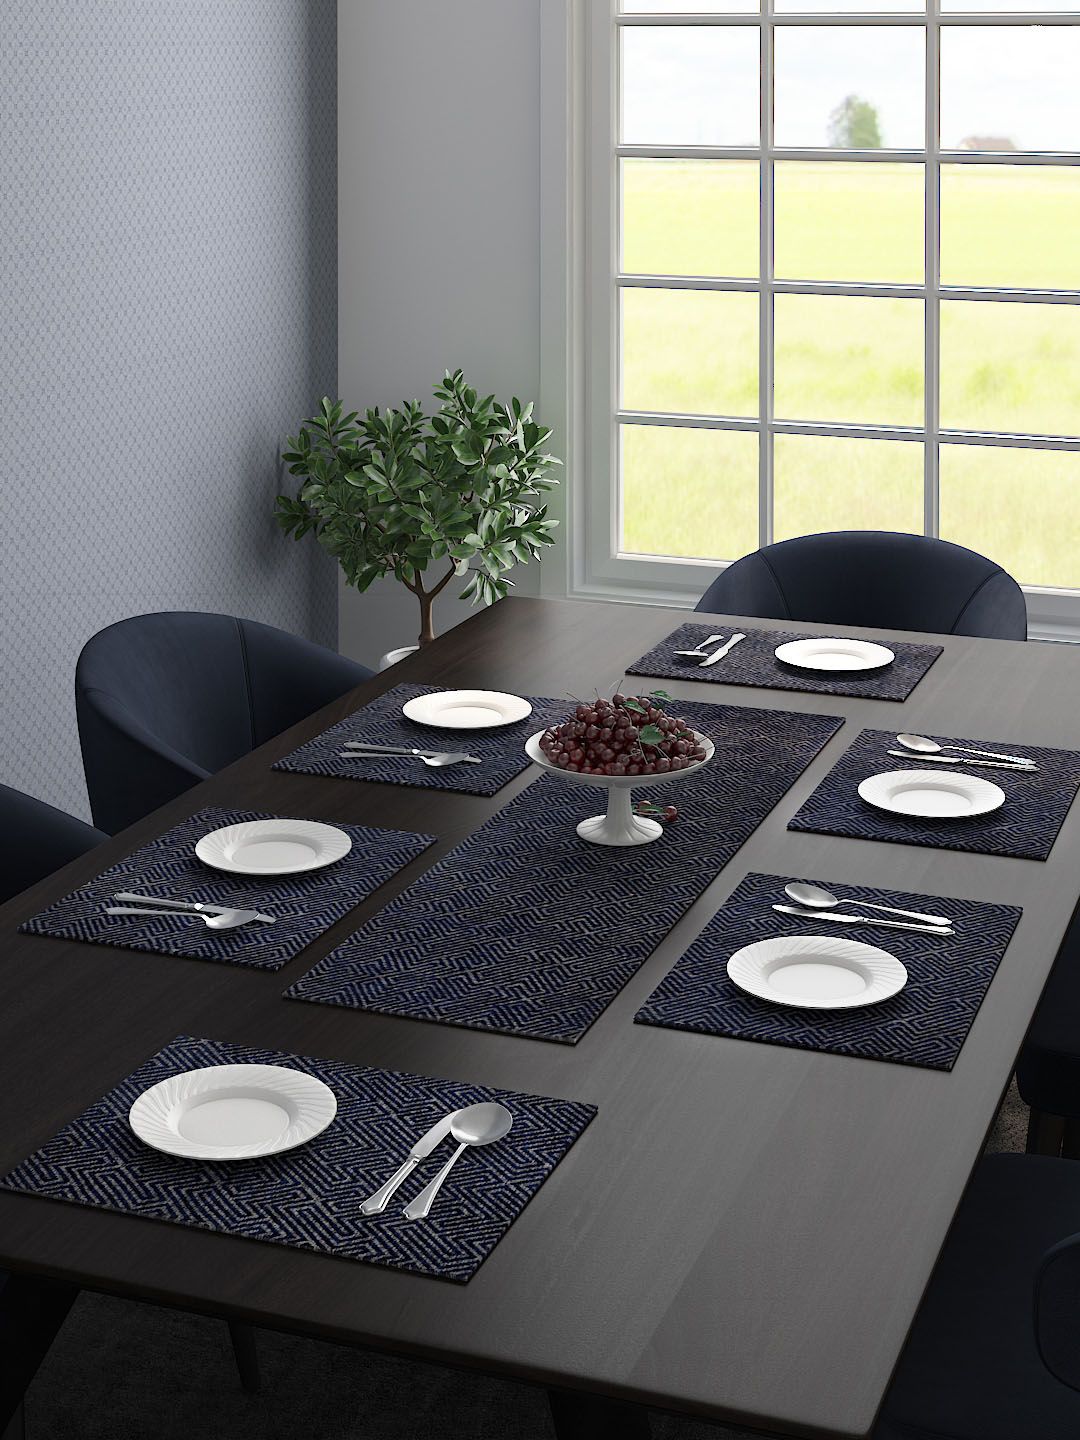 Saral Home Set Of 6 Blue Printed Table Placemats Price in India